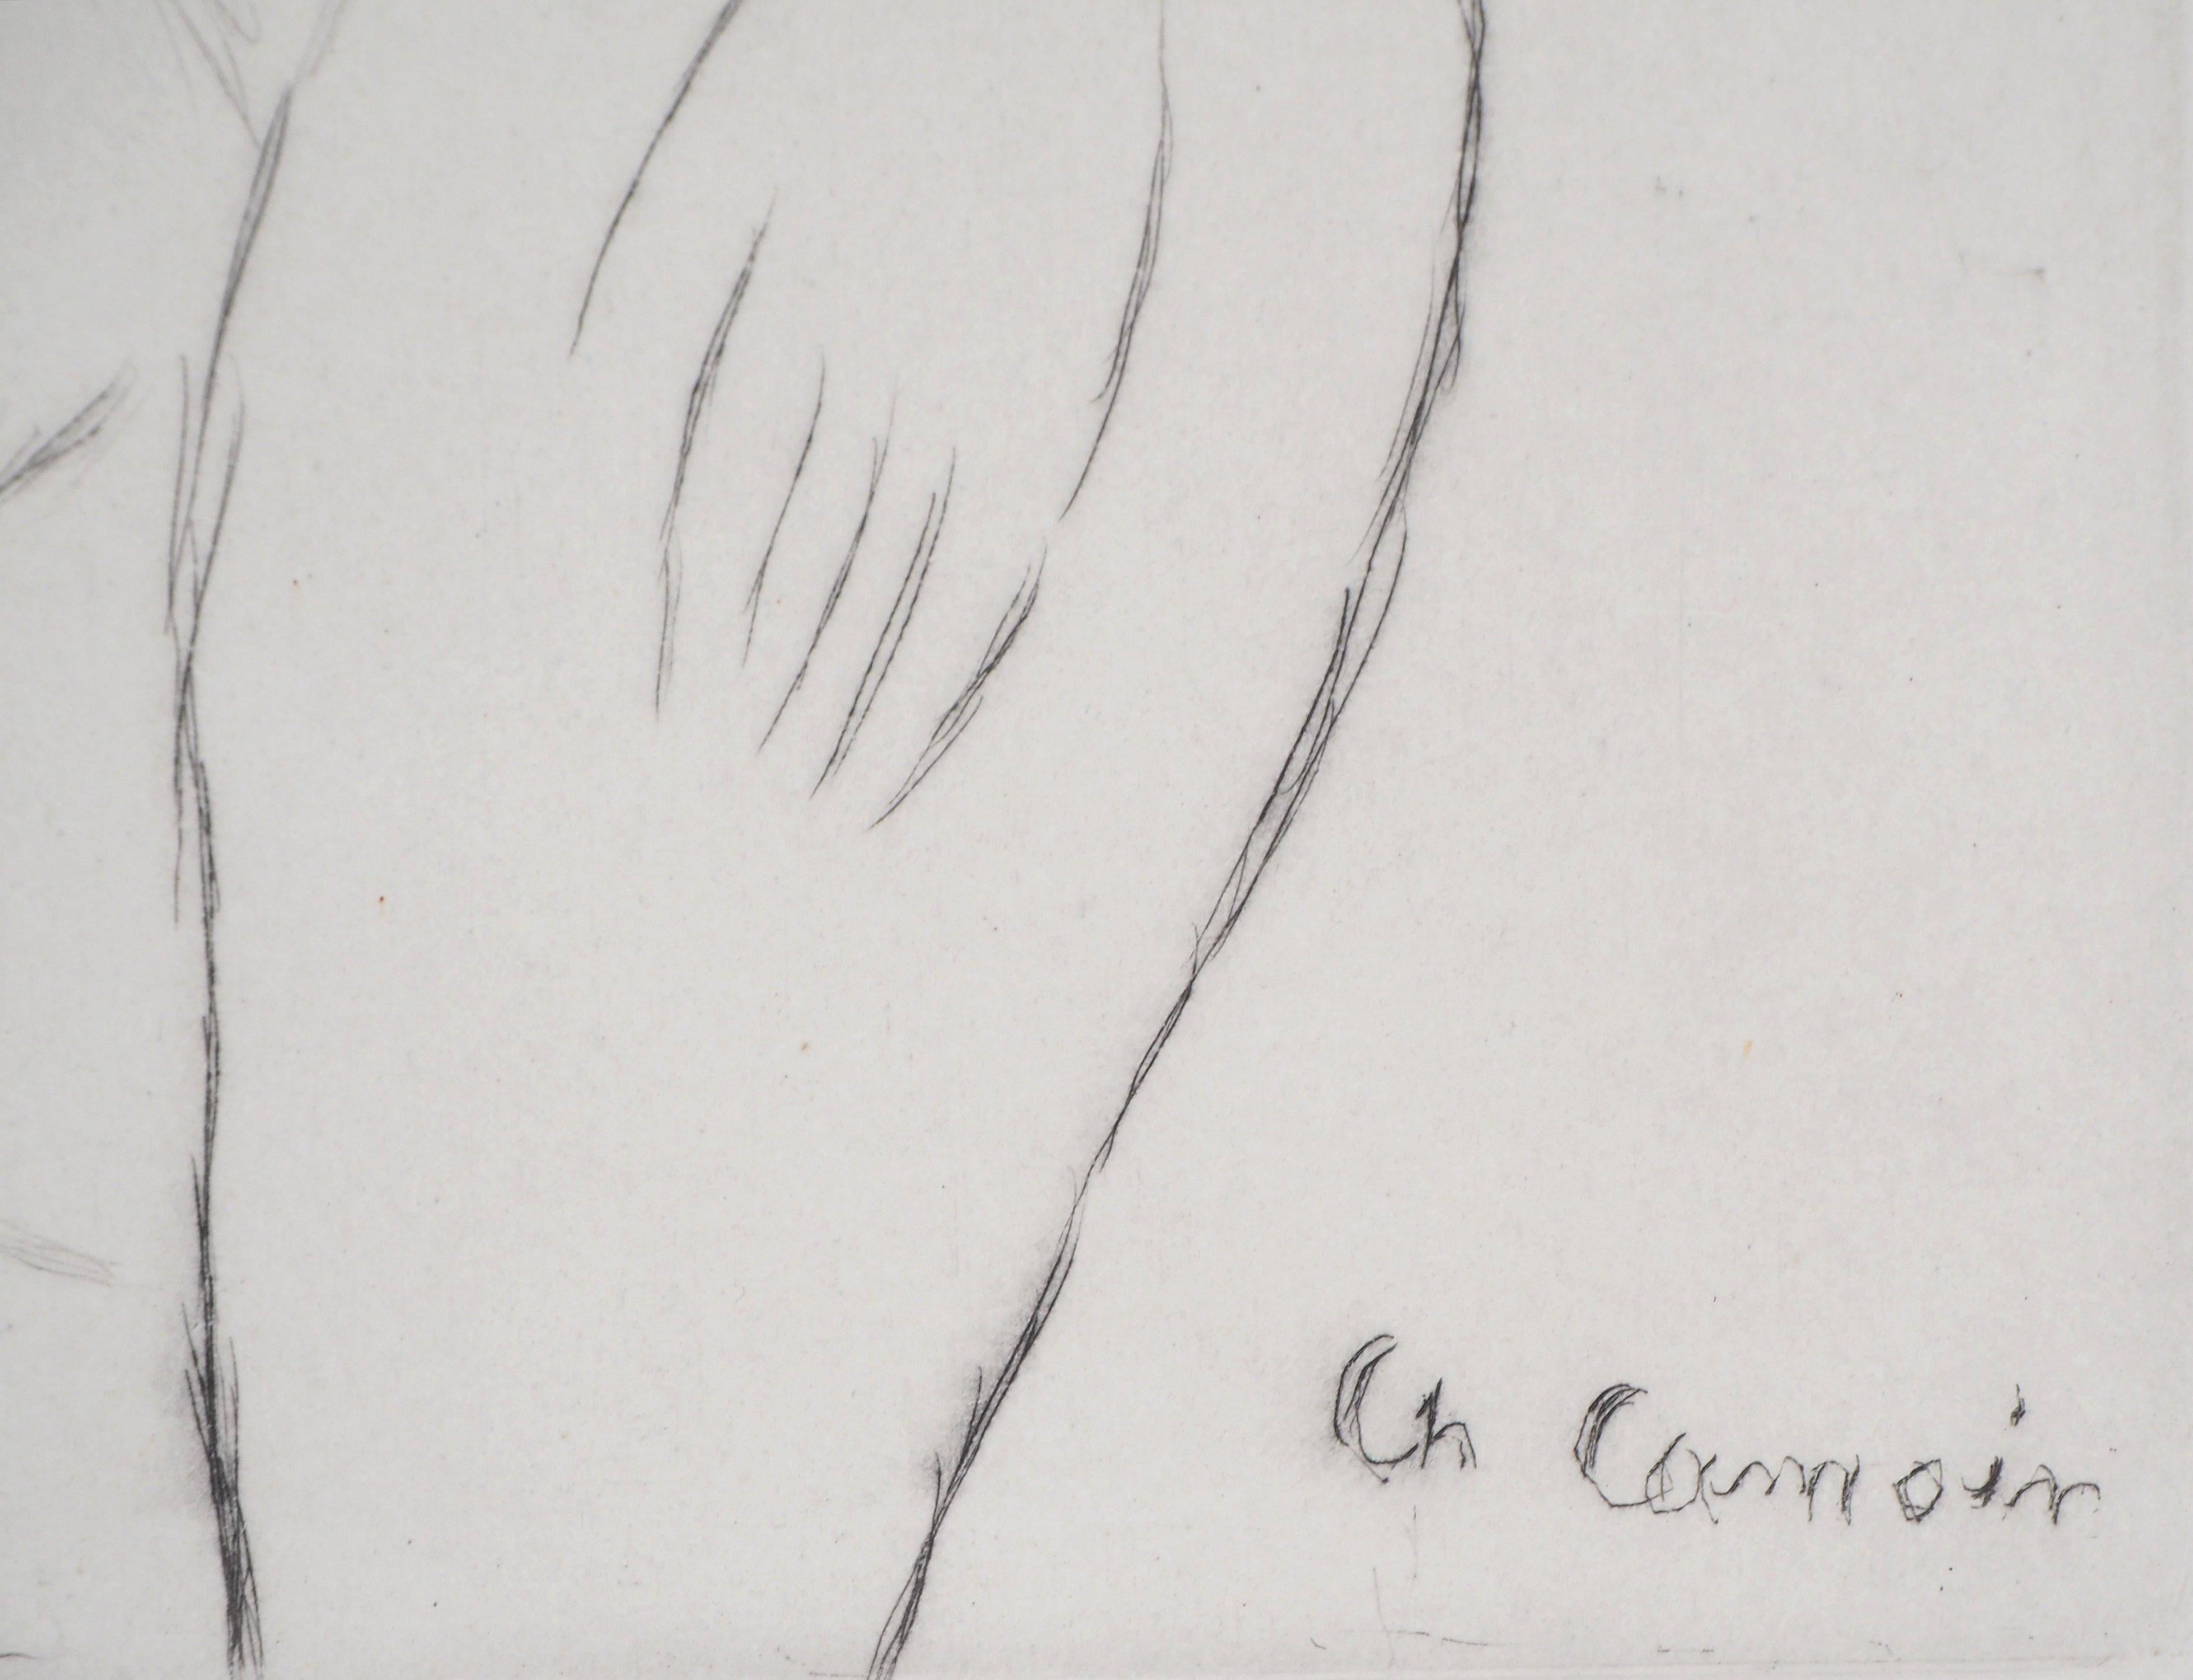 Standing Nude - Original etching - Print by Charles Camoin